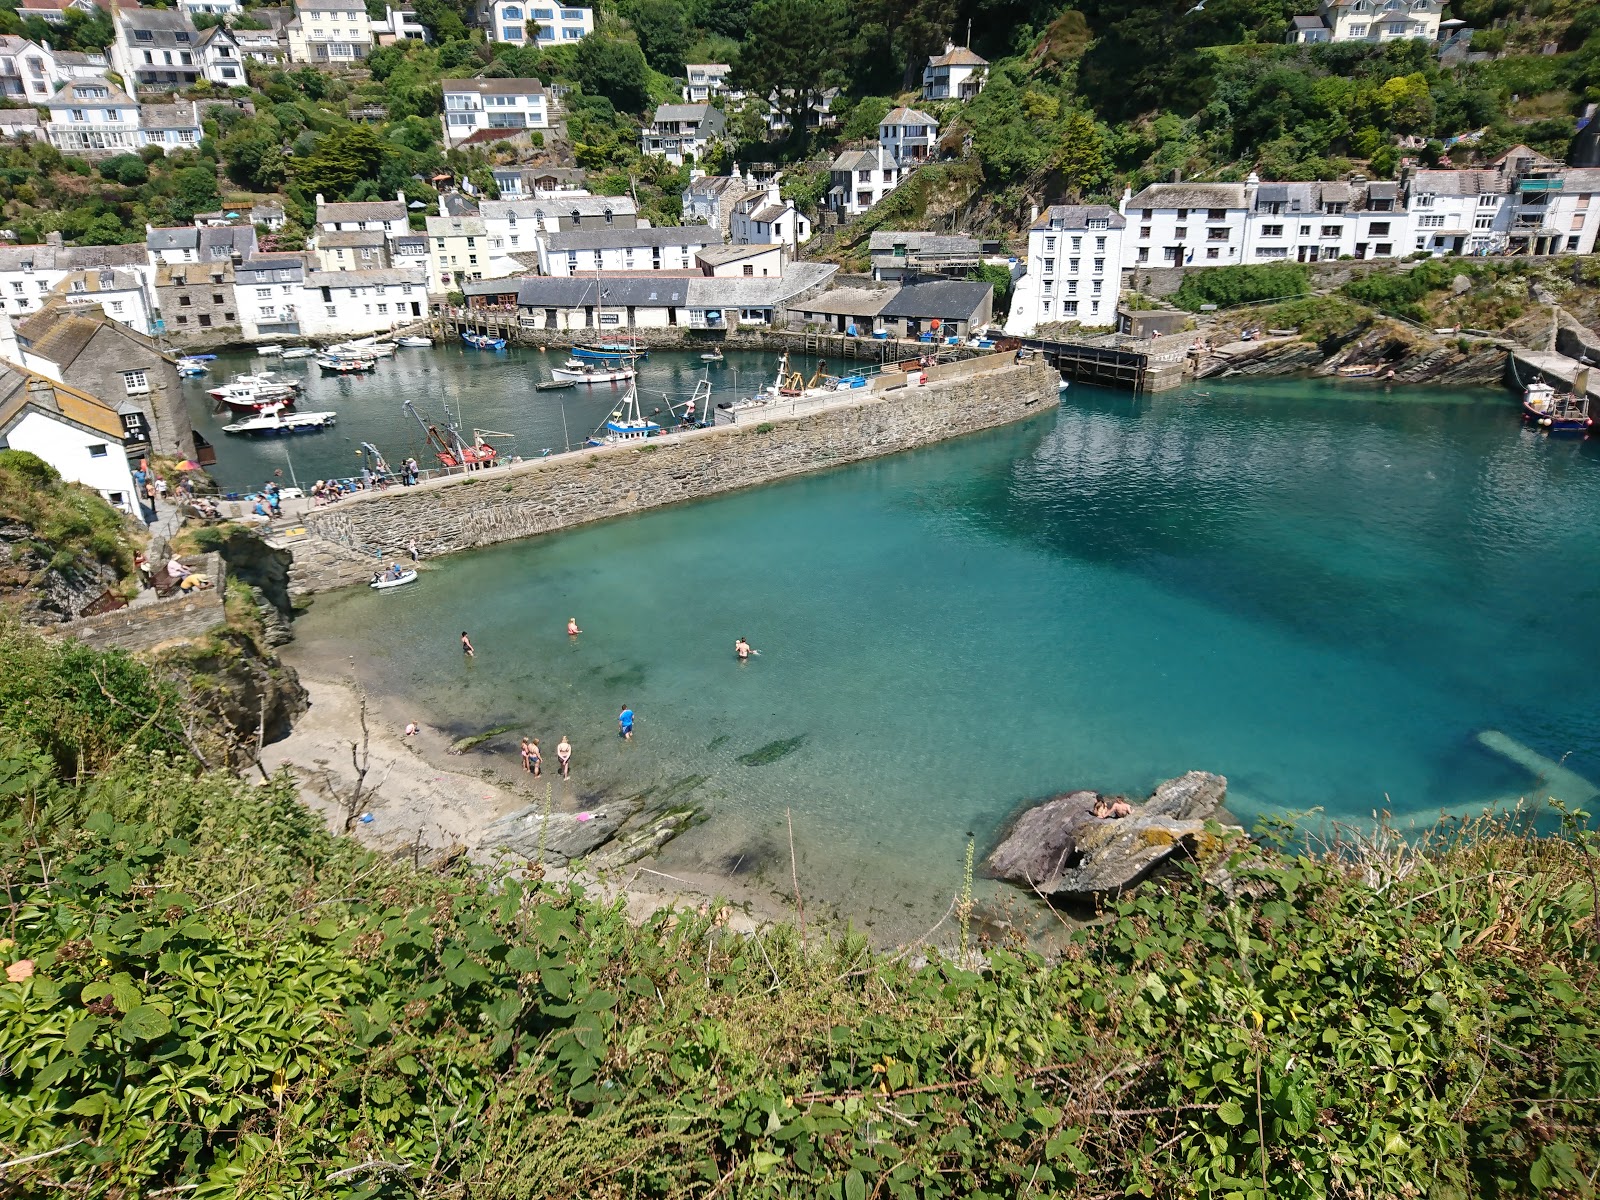 Photo of Polperro beach with small bay